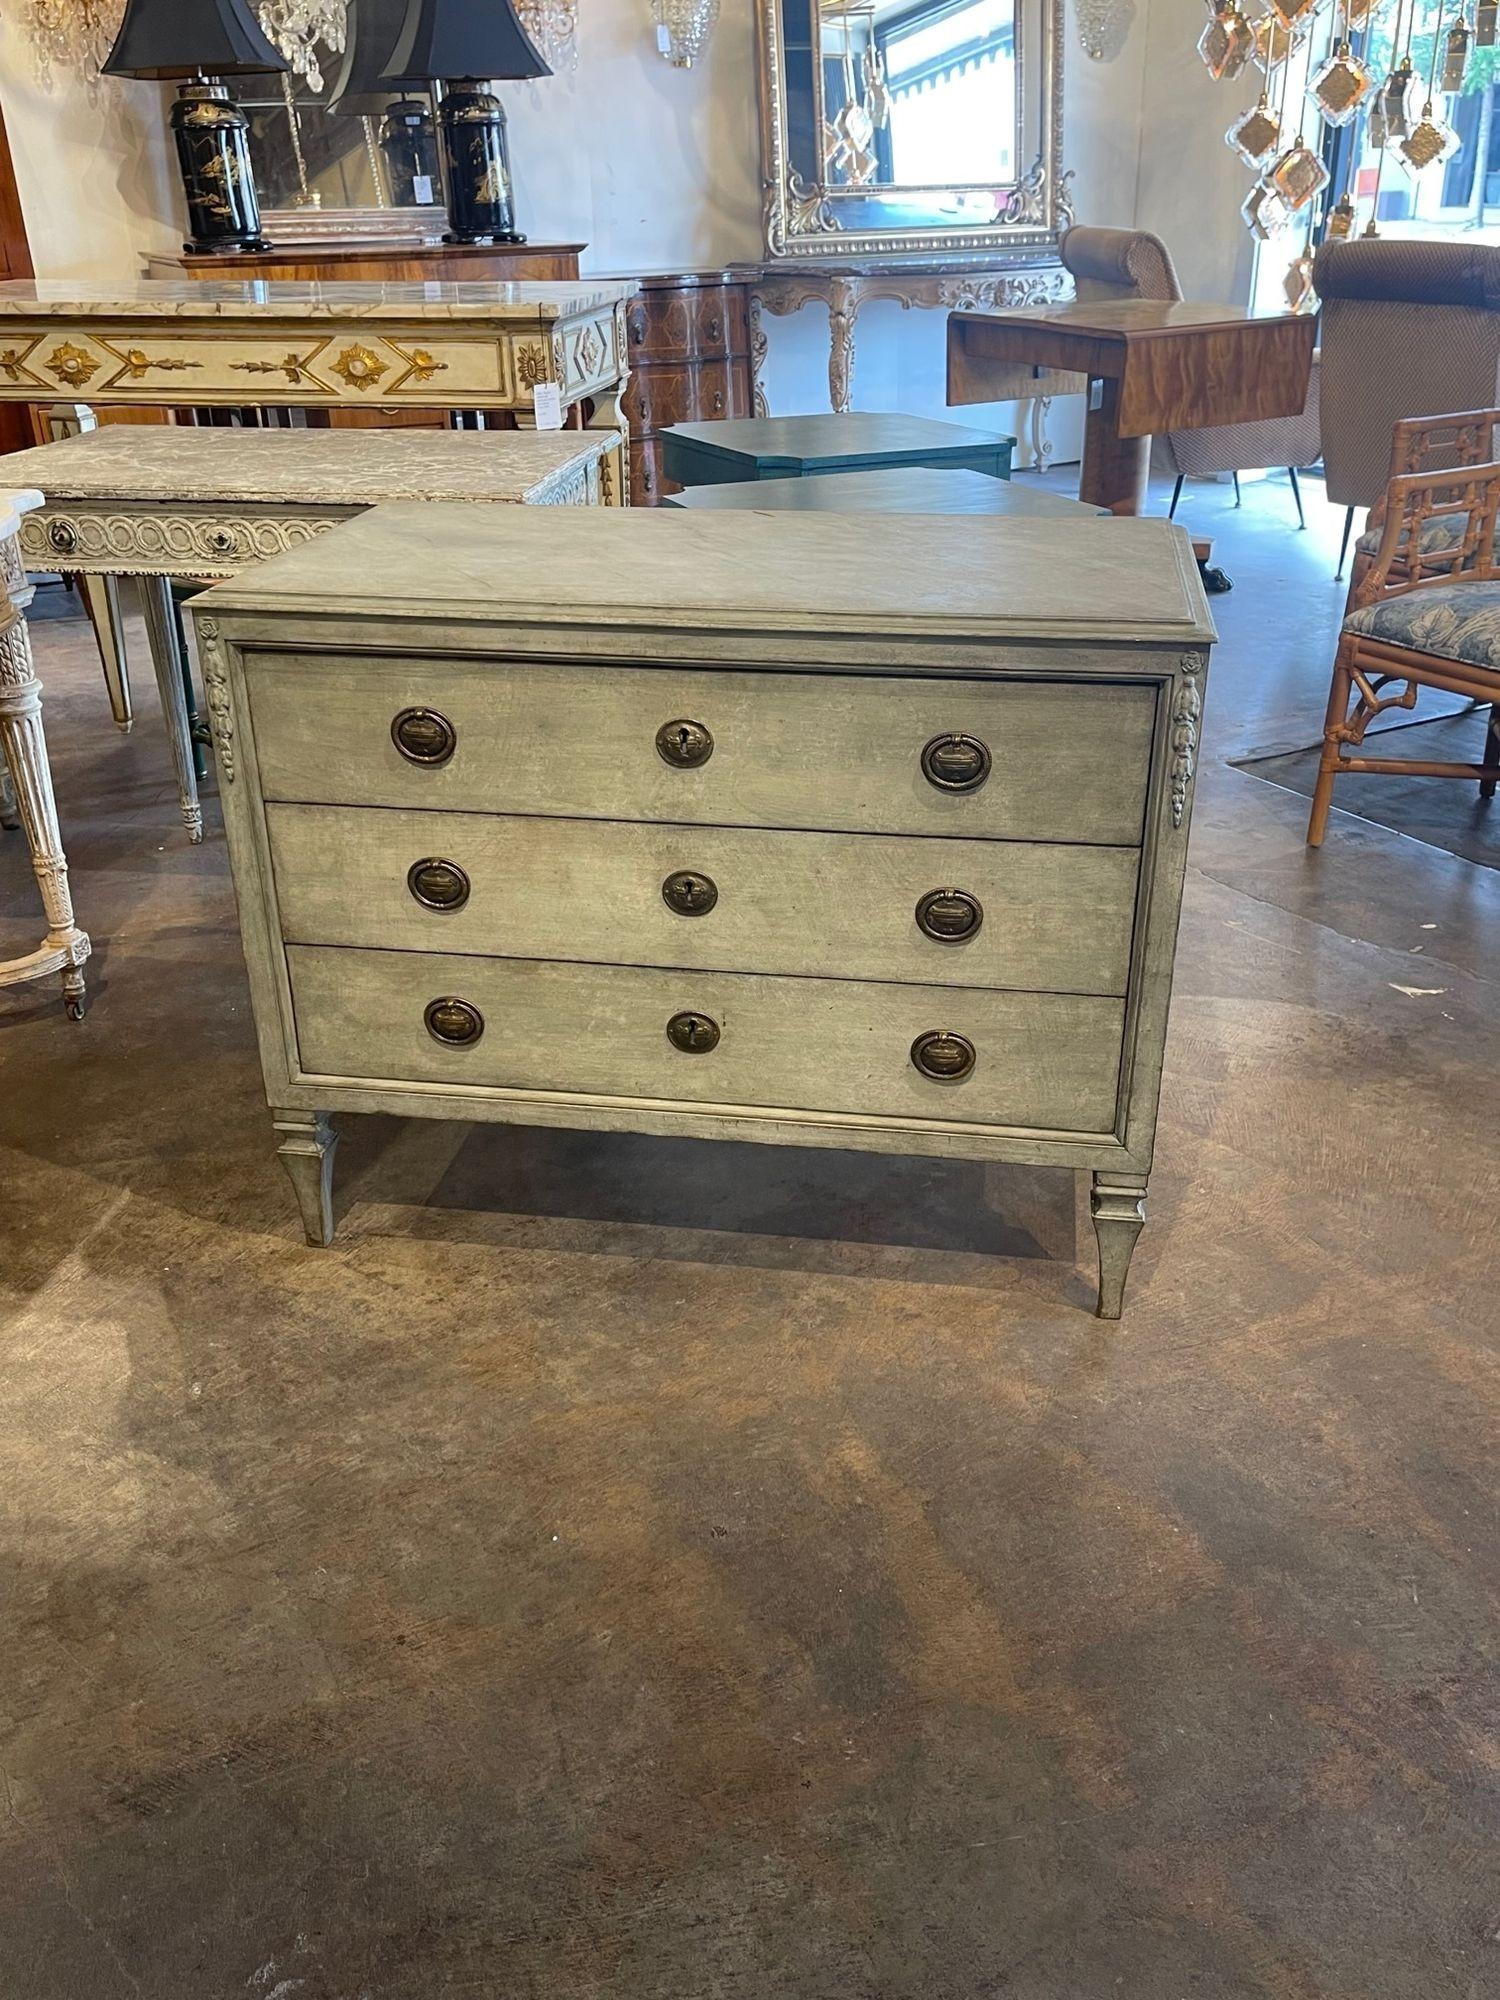 Very fine 19th century Swedish painted Neo-Classical style chest. This piece has beautiful clean lines and a gorgeous patina. Mixes well with a variety of decors. So pretty!